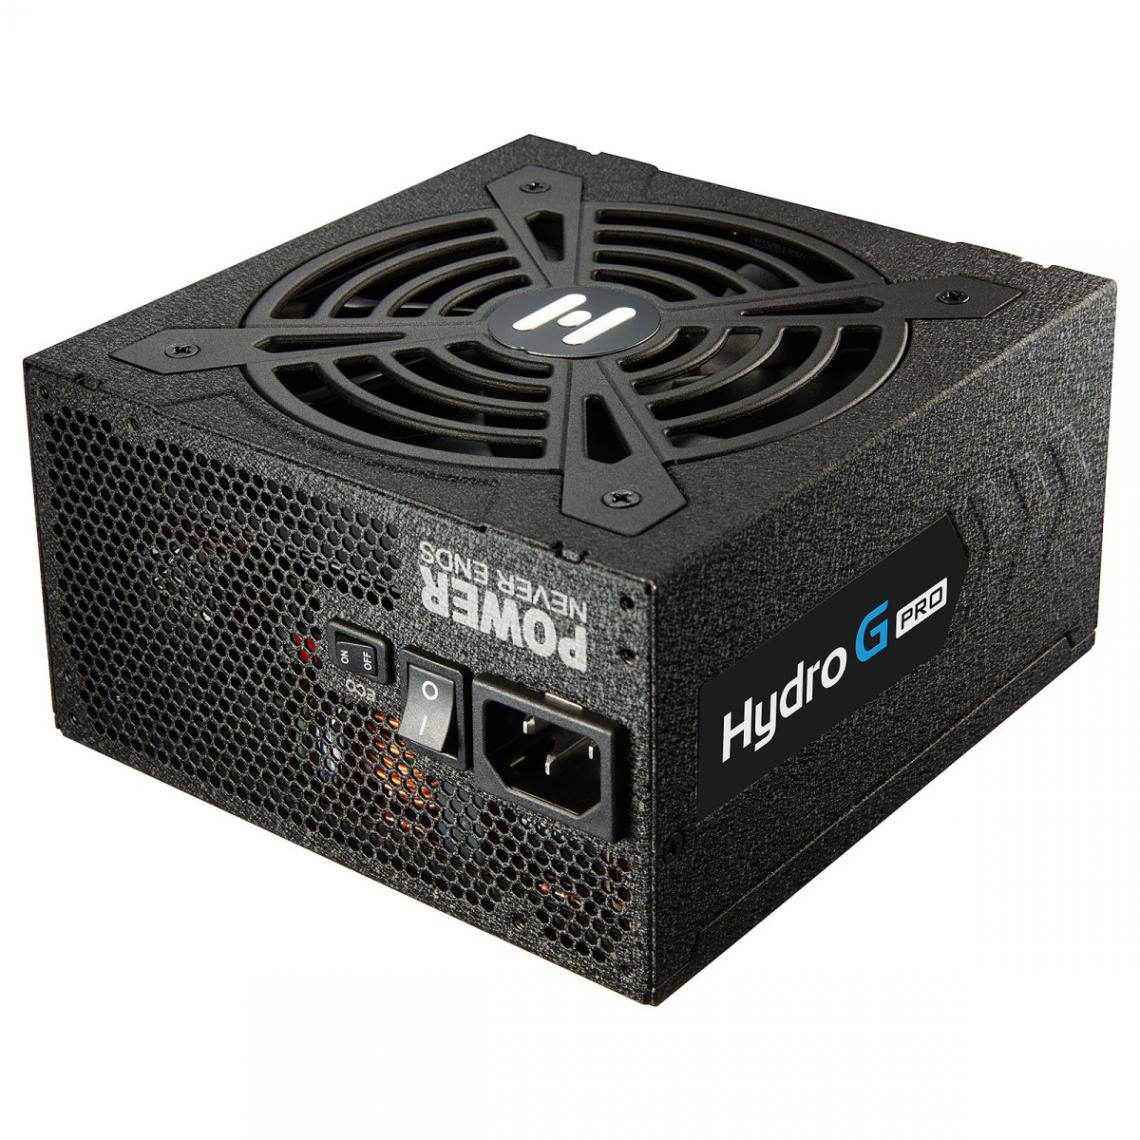 Fsp - HYDRO G PRO 750 - 80+ Gold - Alimentation modulaire